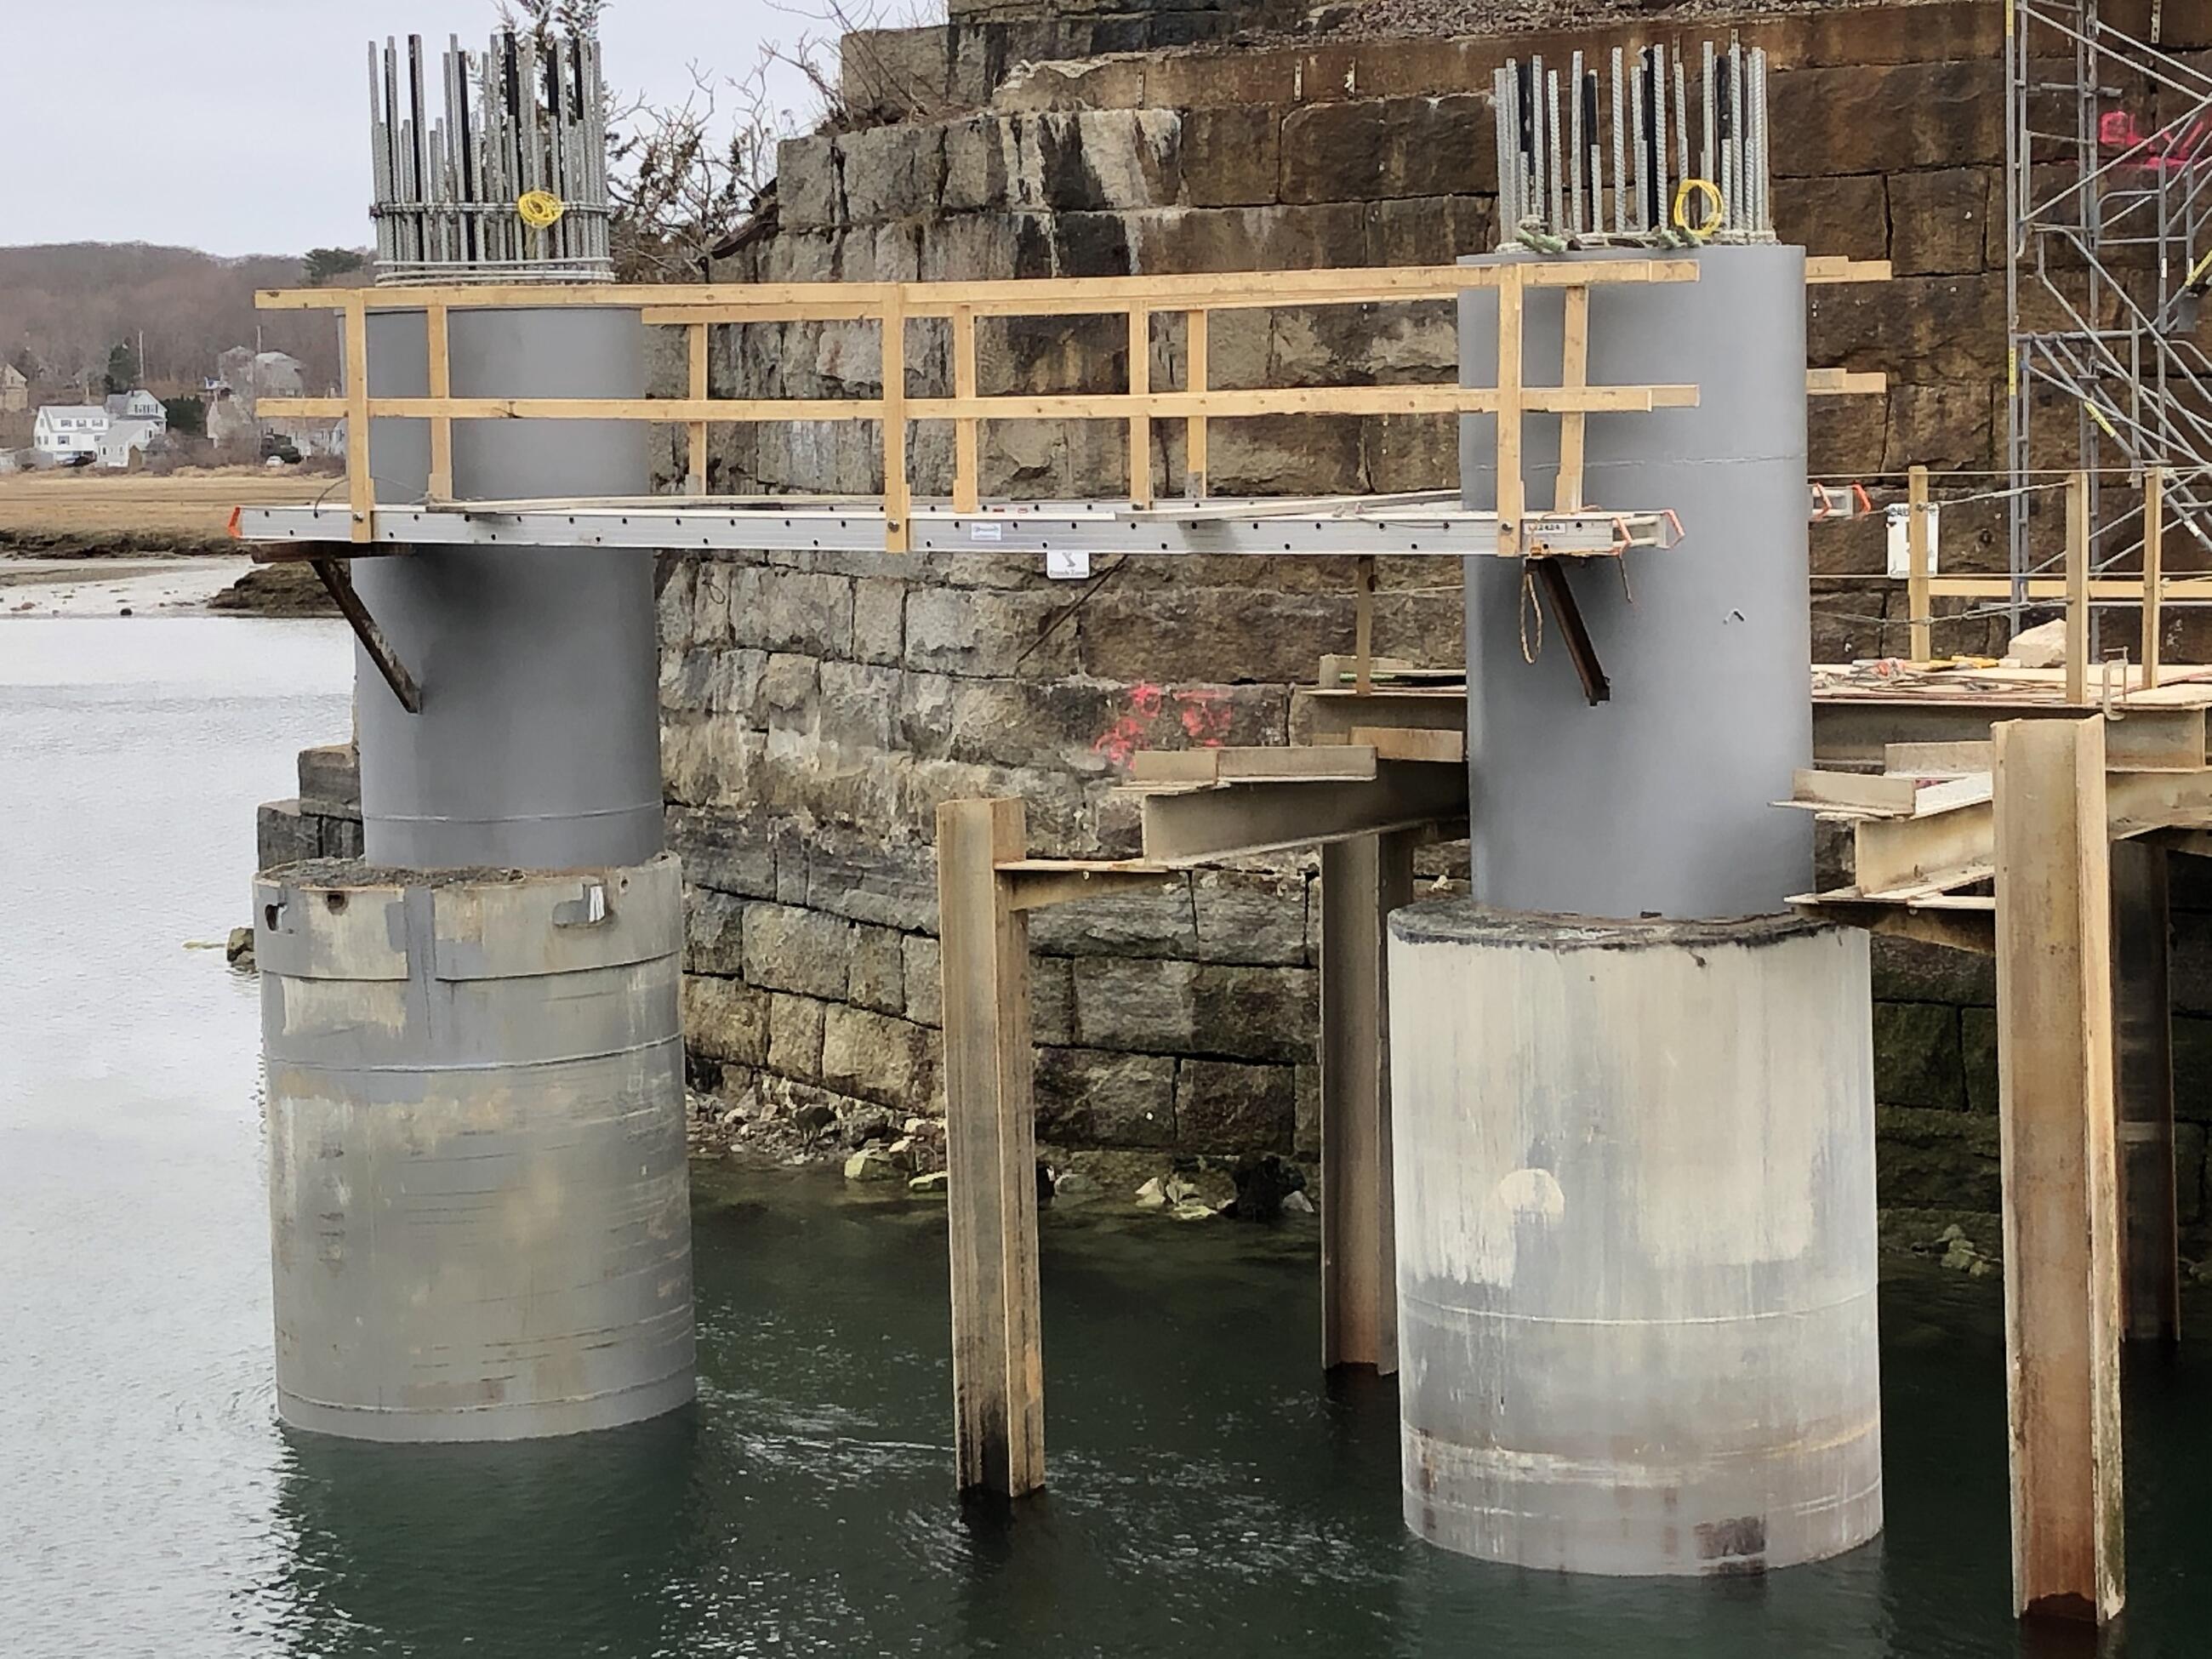 A photo of two large cement shafts in the river with a temporary walkway between them for construction. These will support the bridge above the water